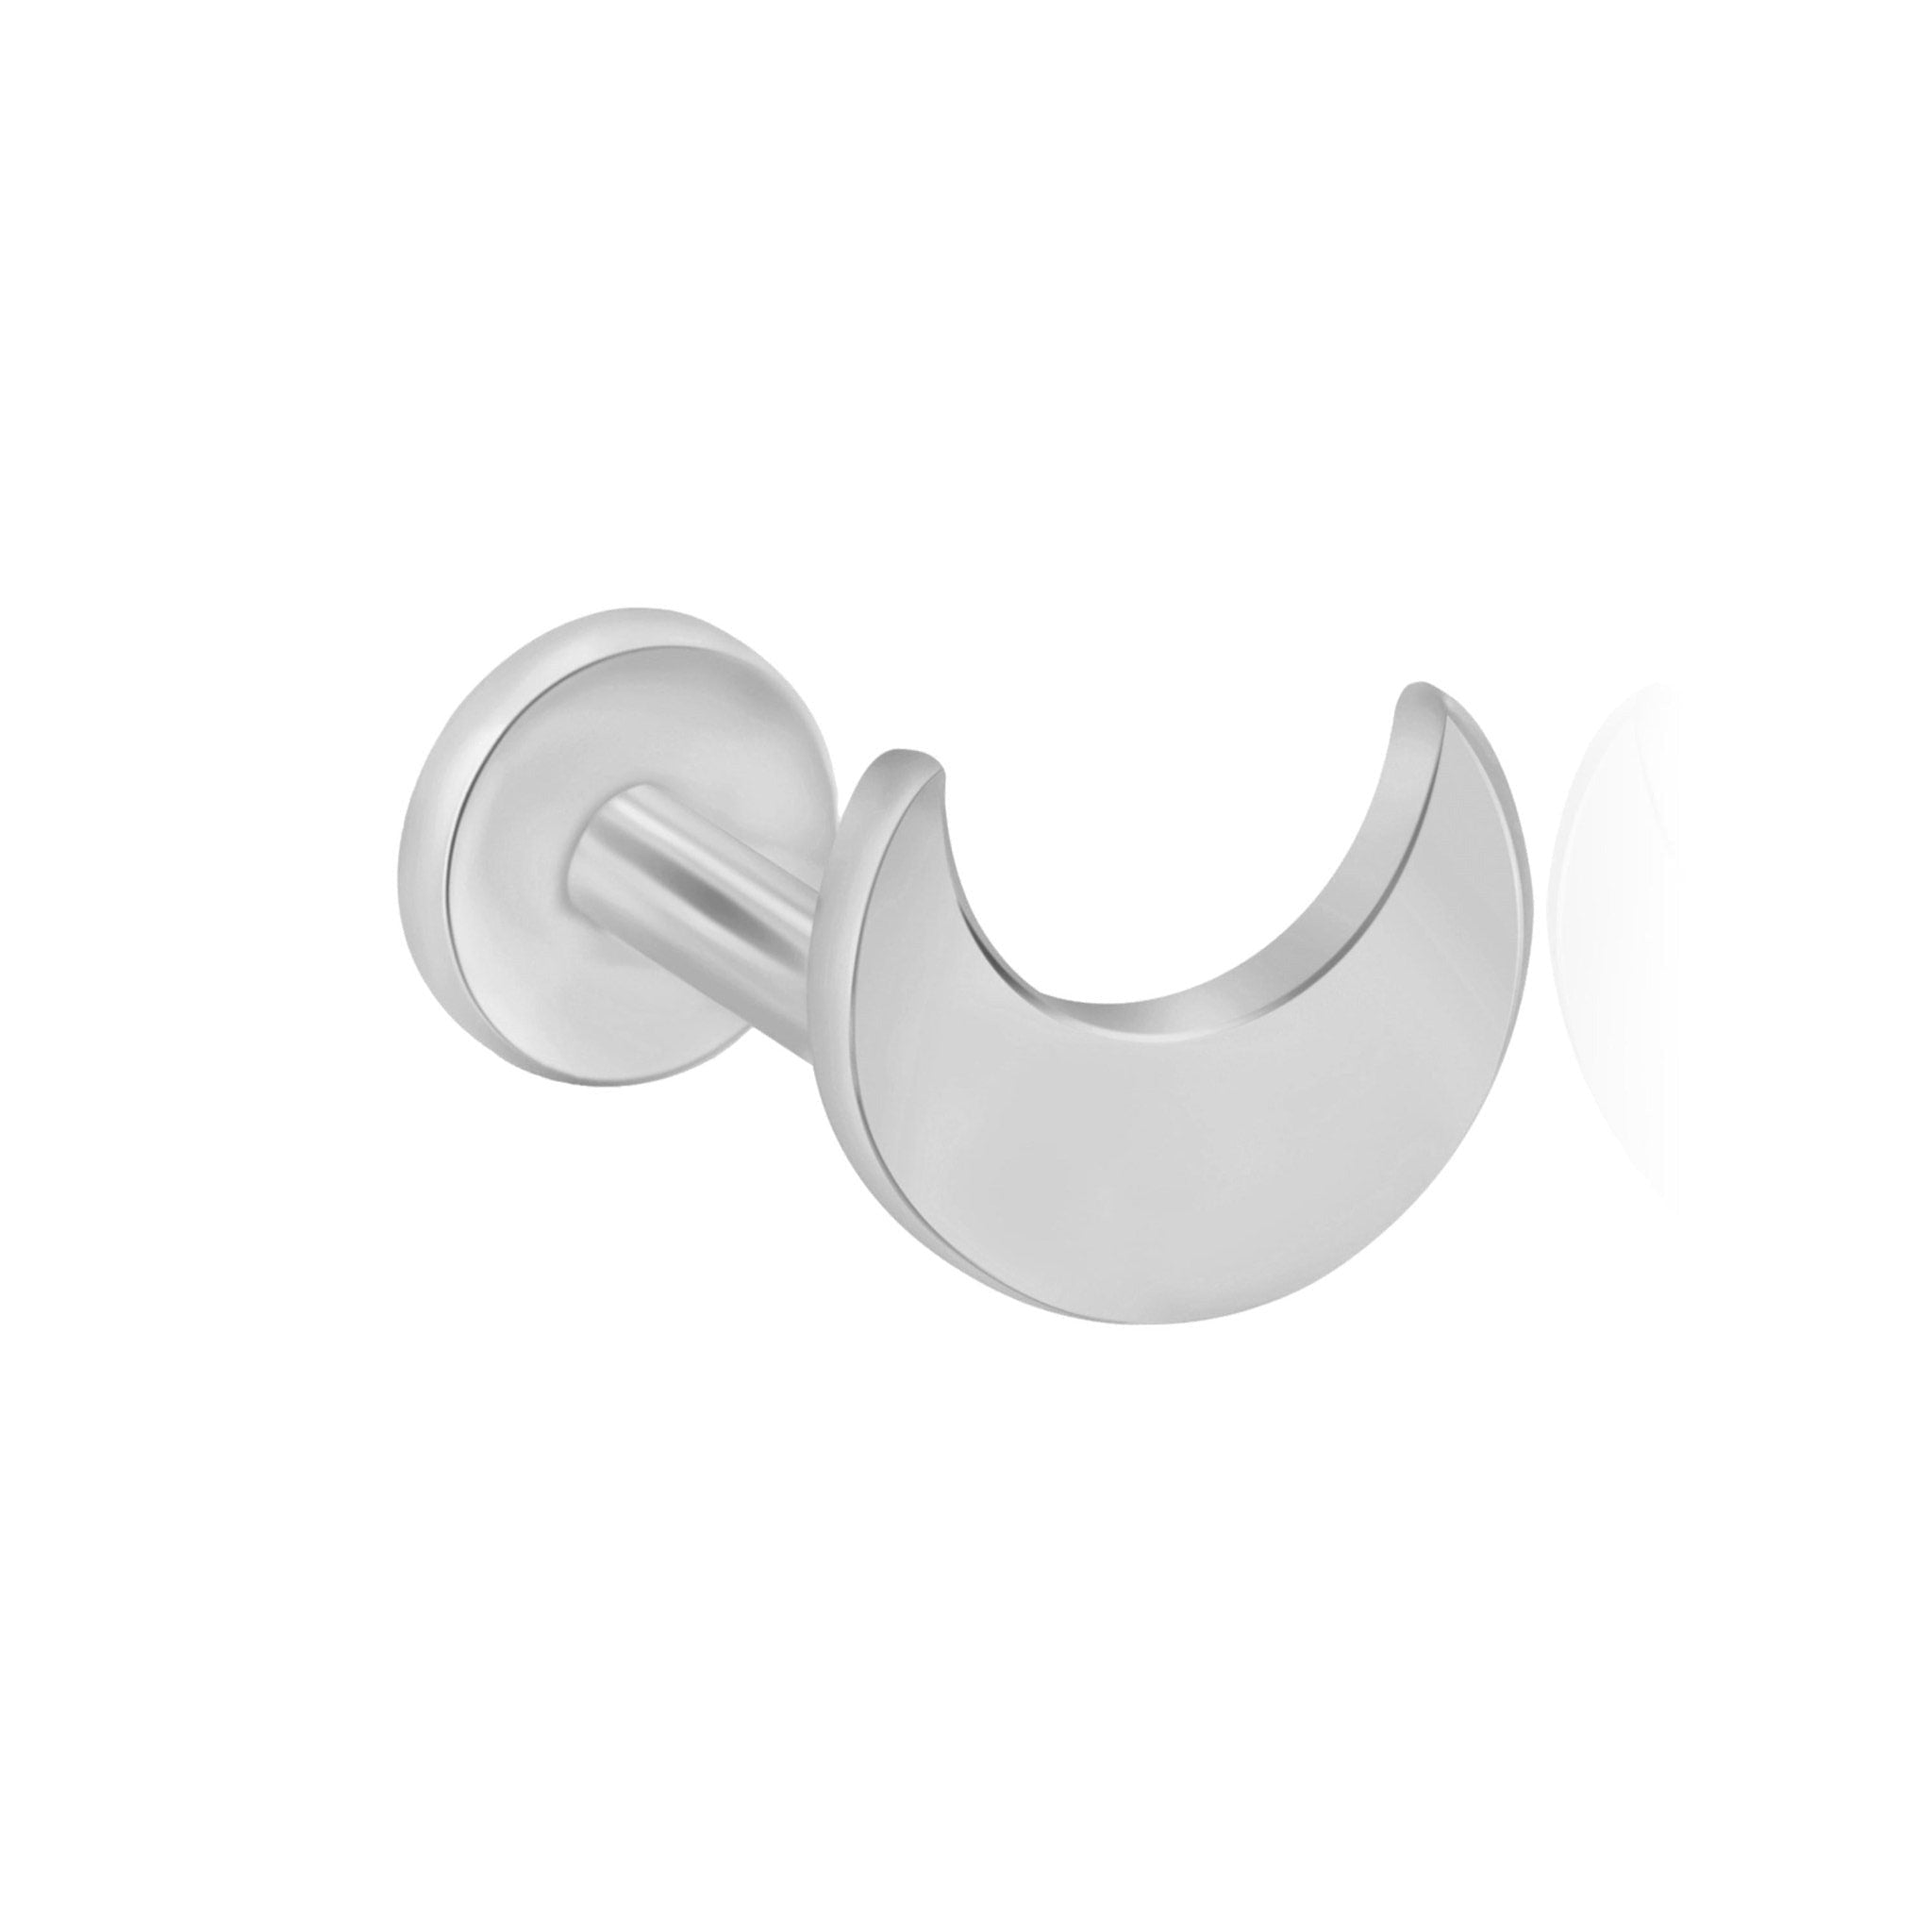 Crescent Moon Flat Back Stud Earring Earrings Estella Collection #product_description# 18486 14k Cartilage Earring Cartilage Earrings #tag4# #tag5# #tag6# #tag7# #tag8# #tag9# #tag10# 5MM